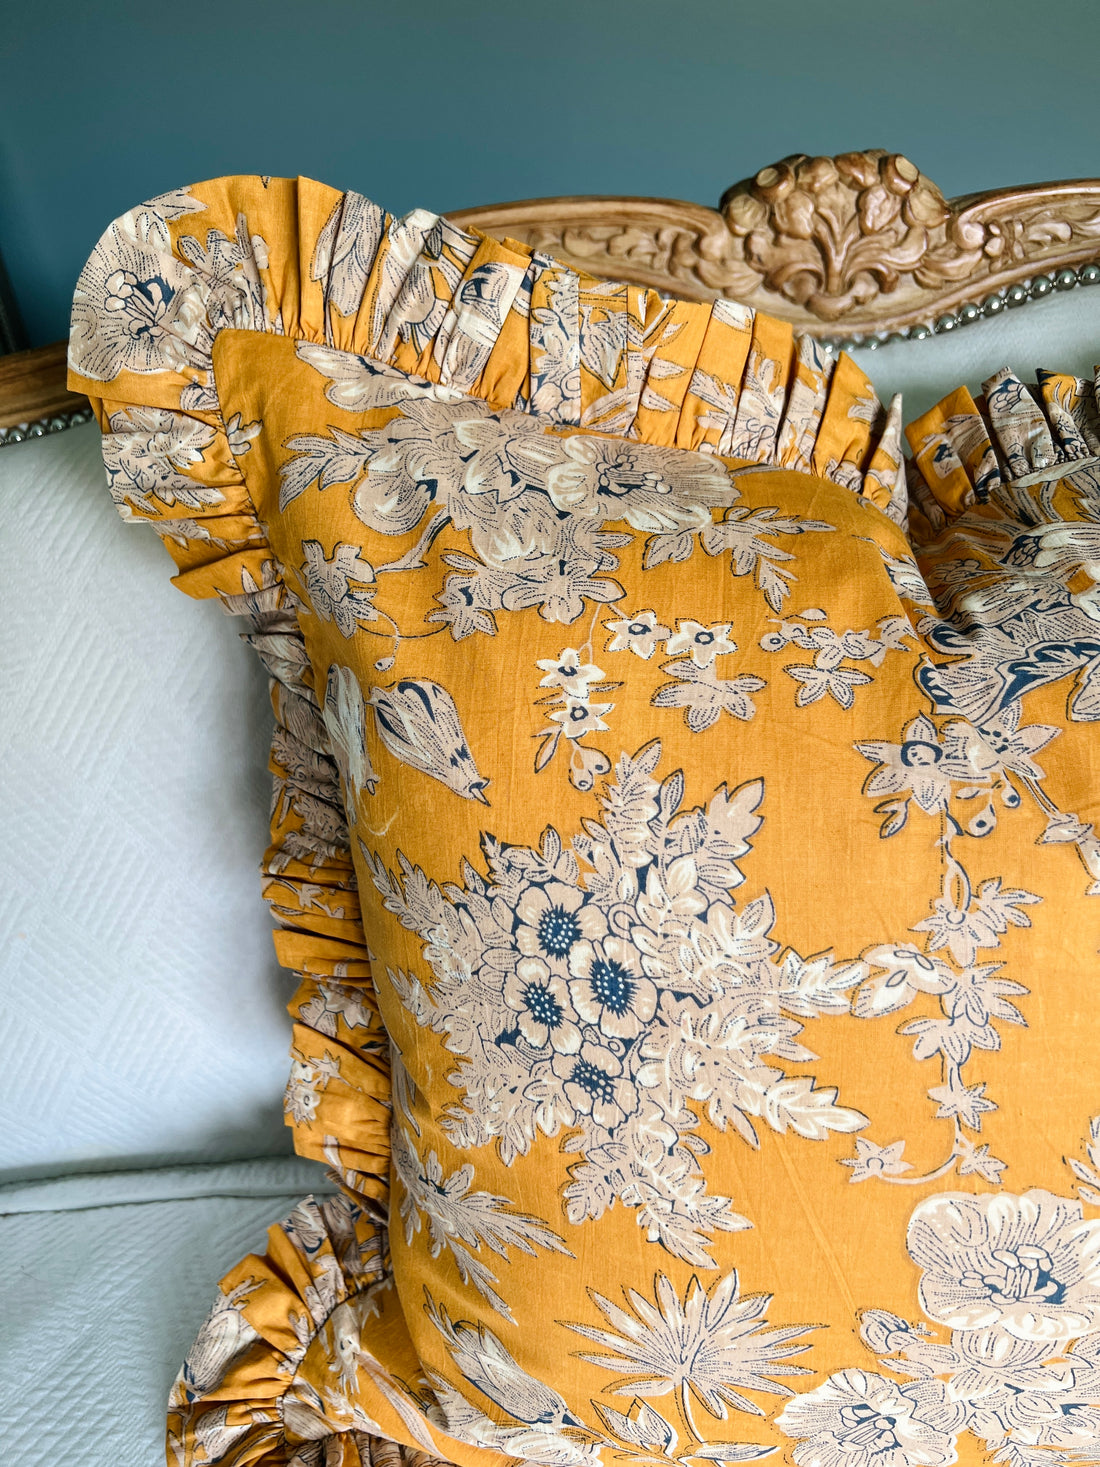 Mustard yellow floral toile pillow cover with ruffle trim PREORDER